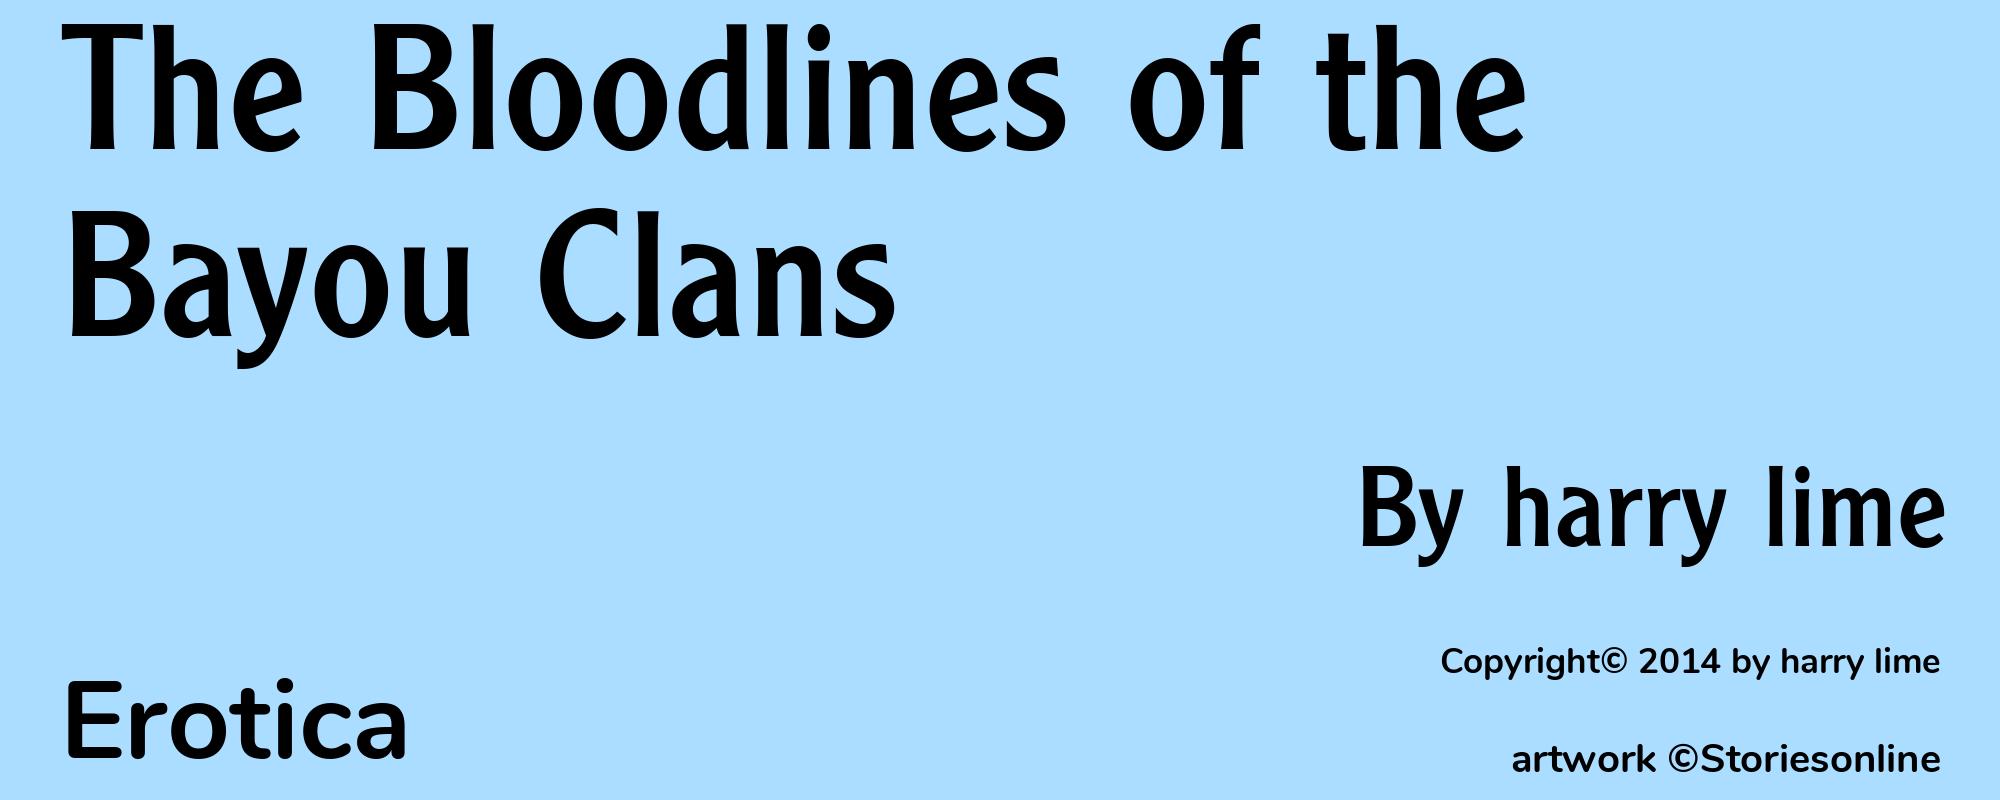 The Bloodlines of the Bayou Clans - Cover